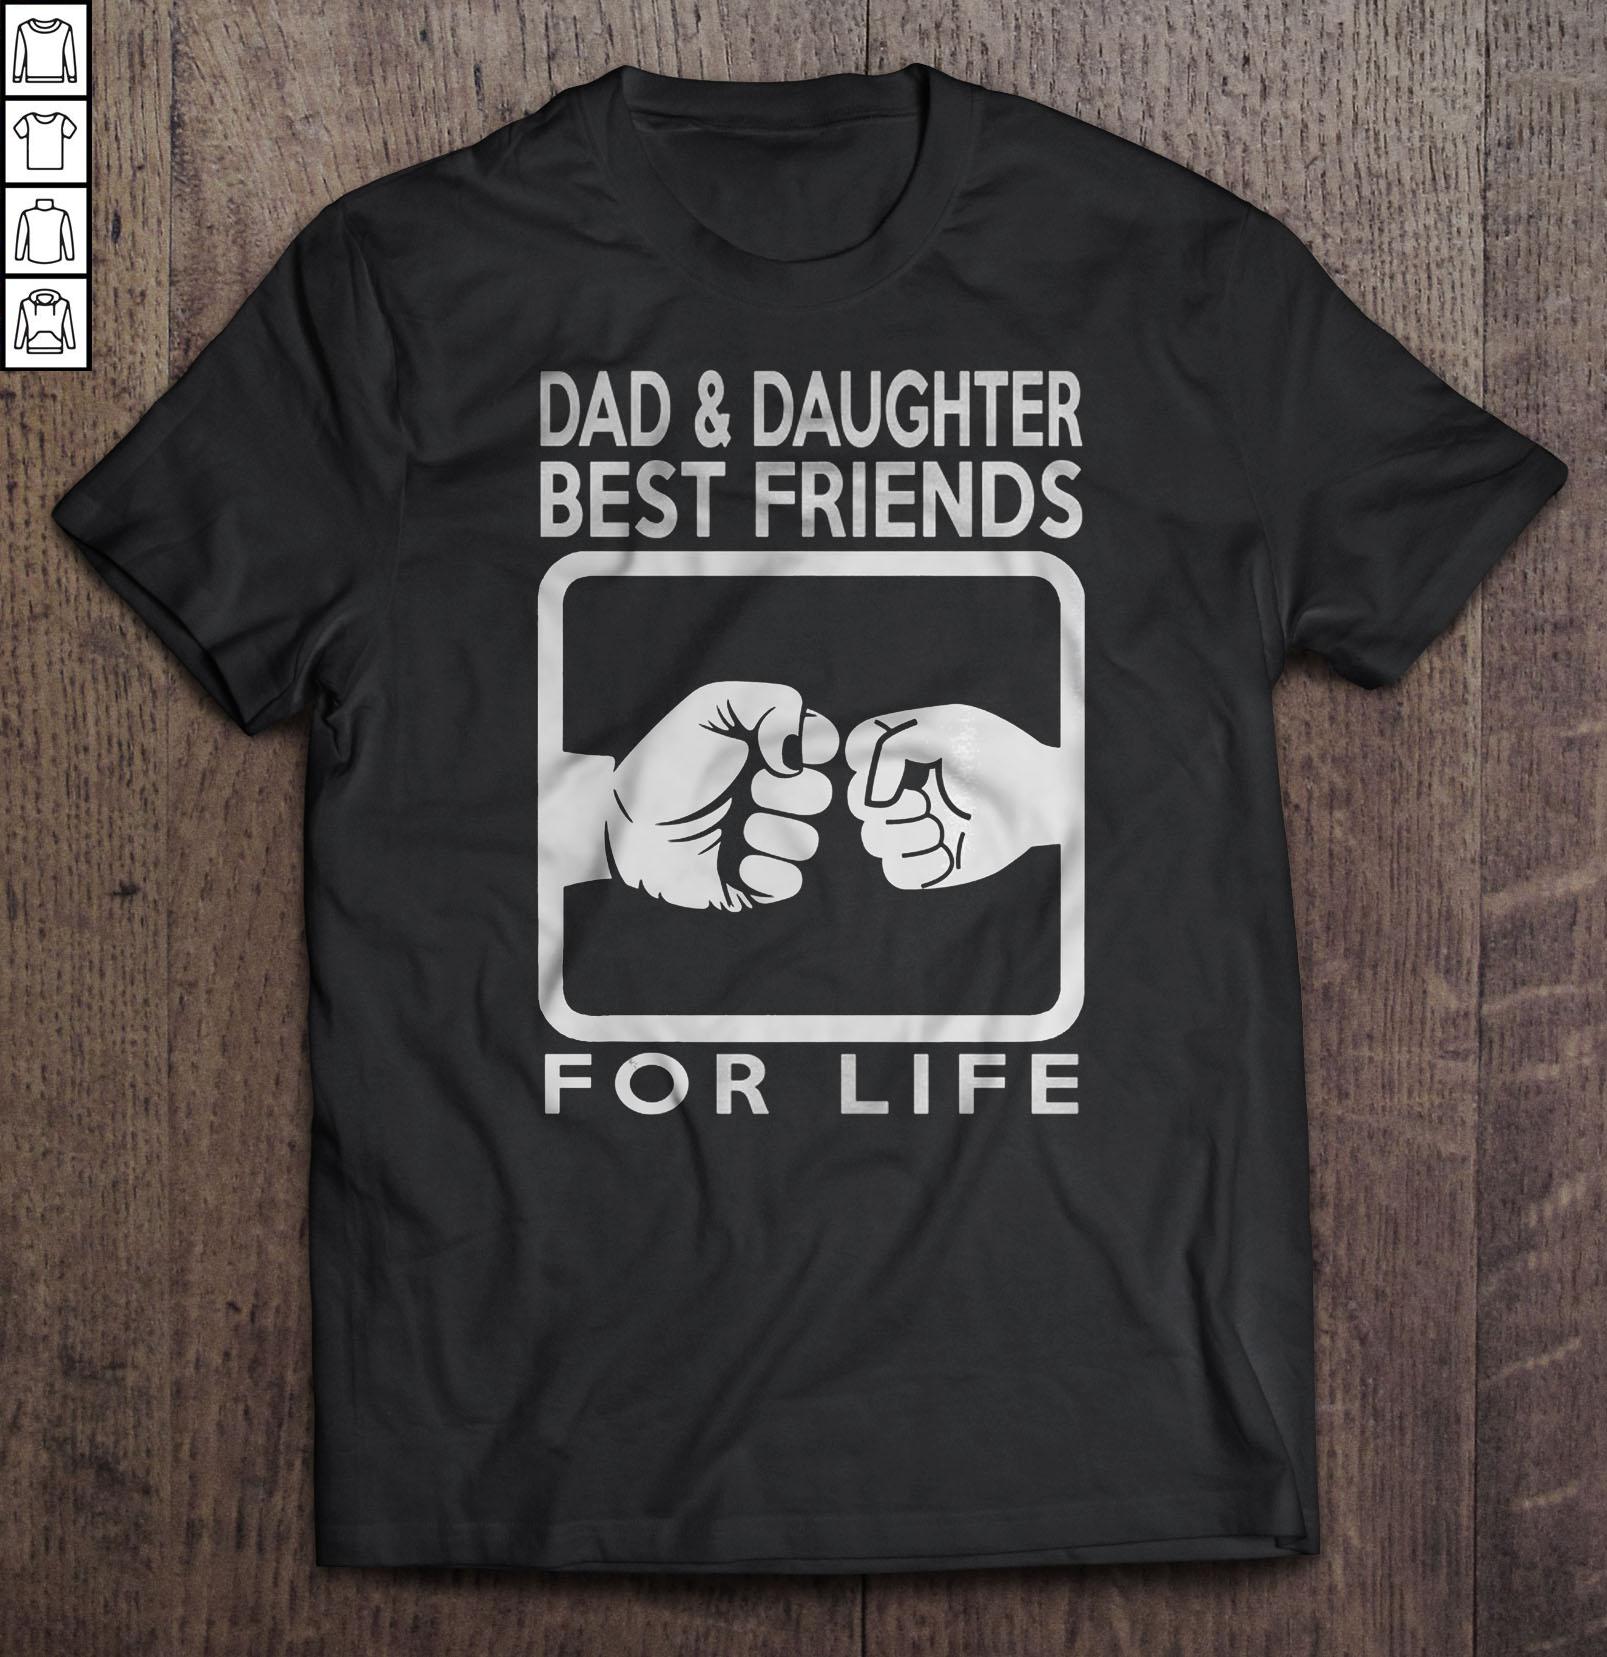 Dad & Daughter Best friends for life TShirt